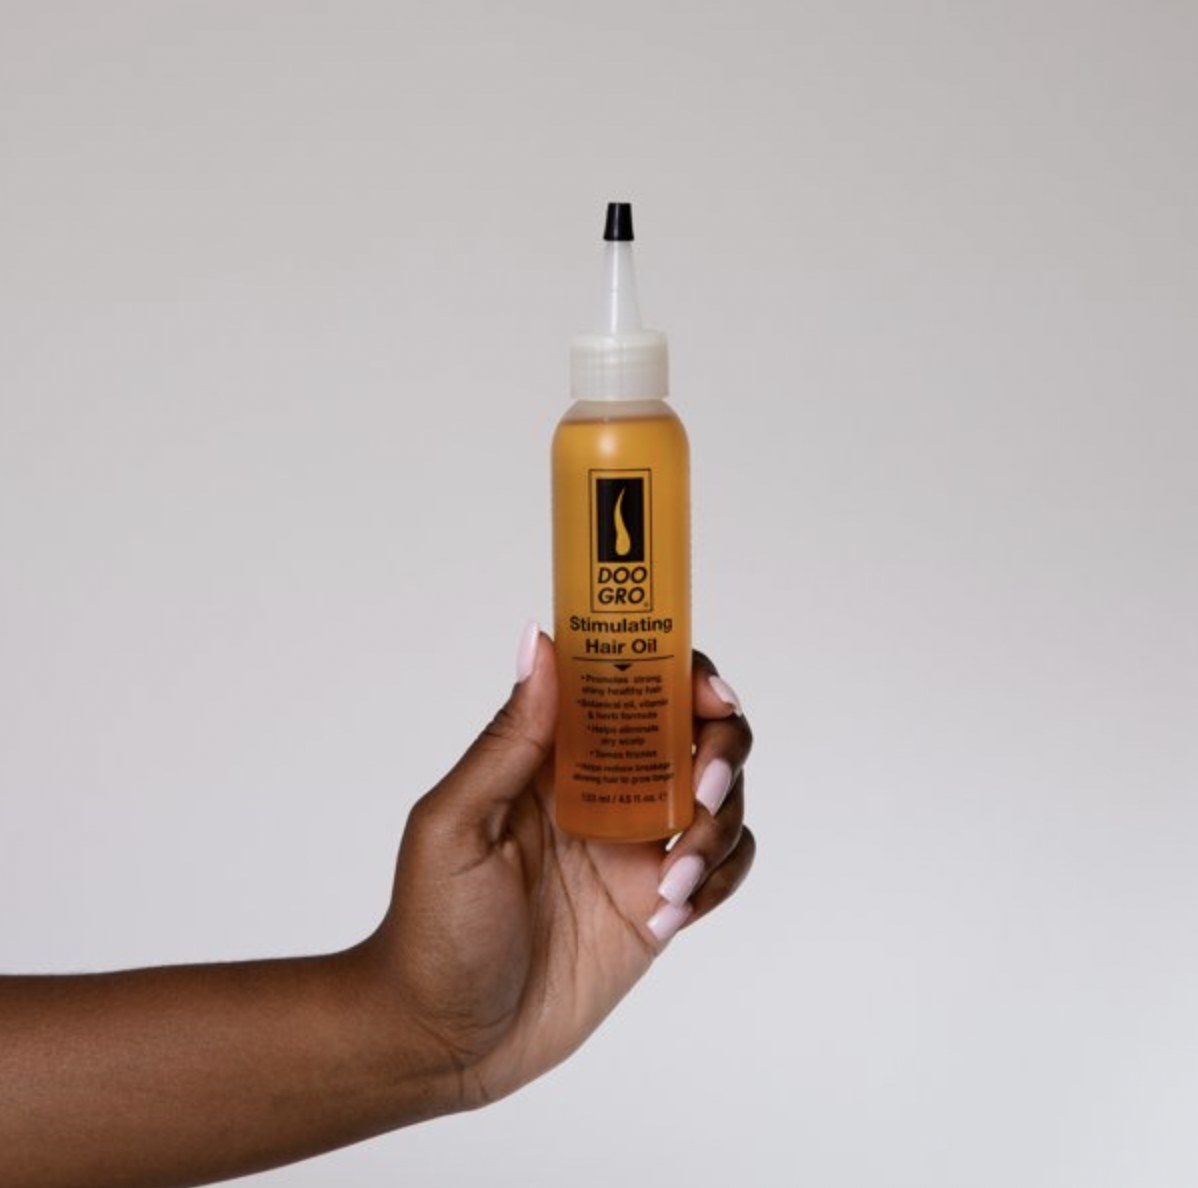 A person holding a bottle of hair oil